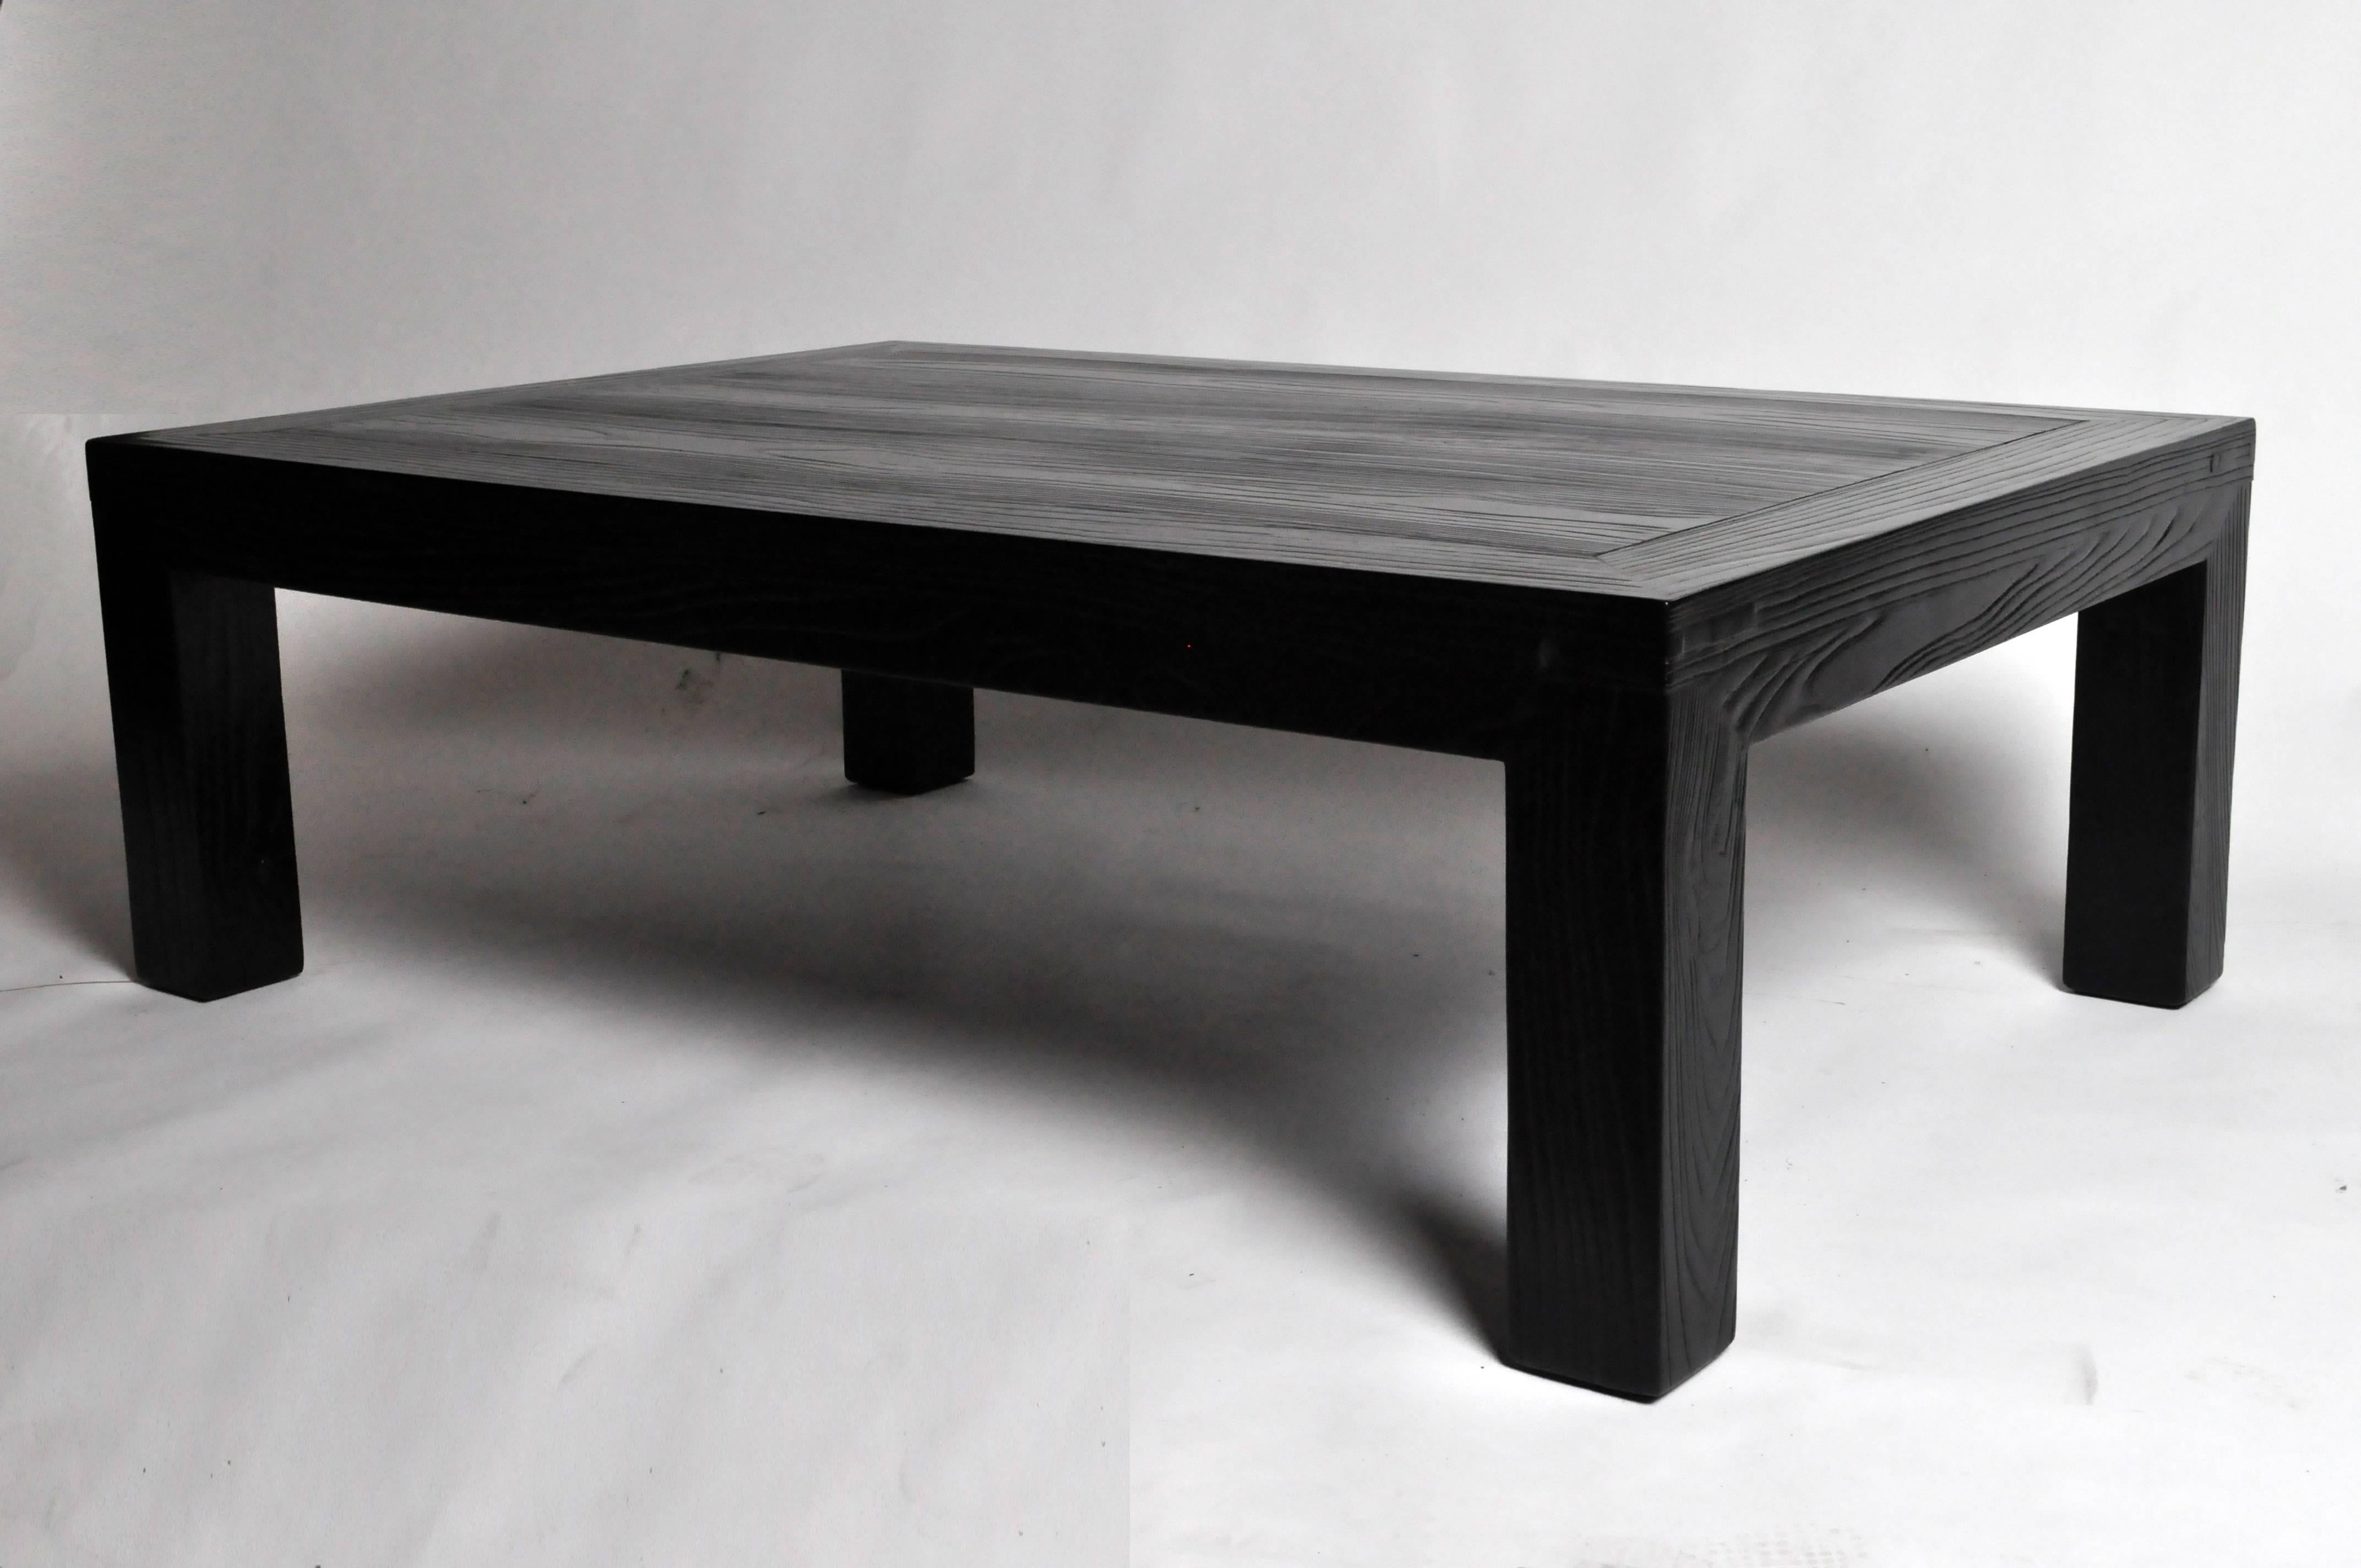 Clean lines and a simple design allow this coffee table to transition into any style interior. Whether minimalist, traditional or rustic, it perfectly compliments its surroundings.

This modern and timeless design is completely customizable. Our